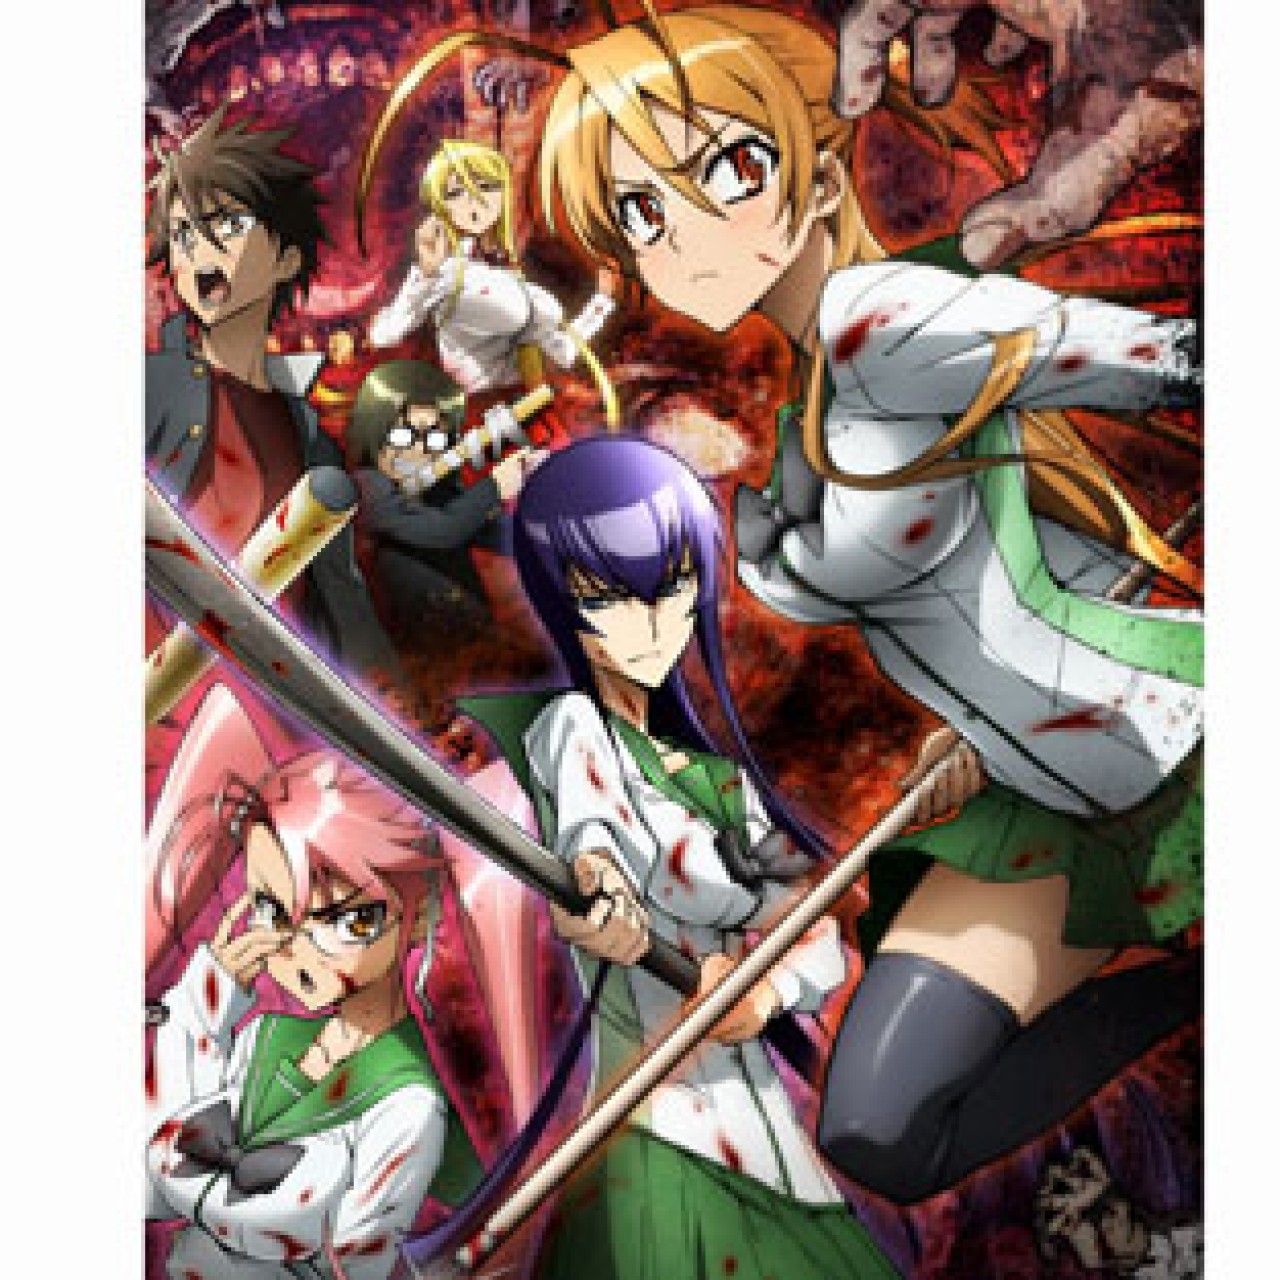 High School of the Dead (anime) - YP